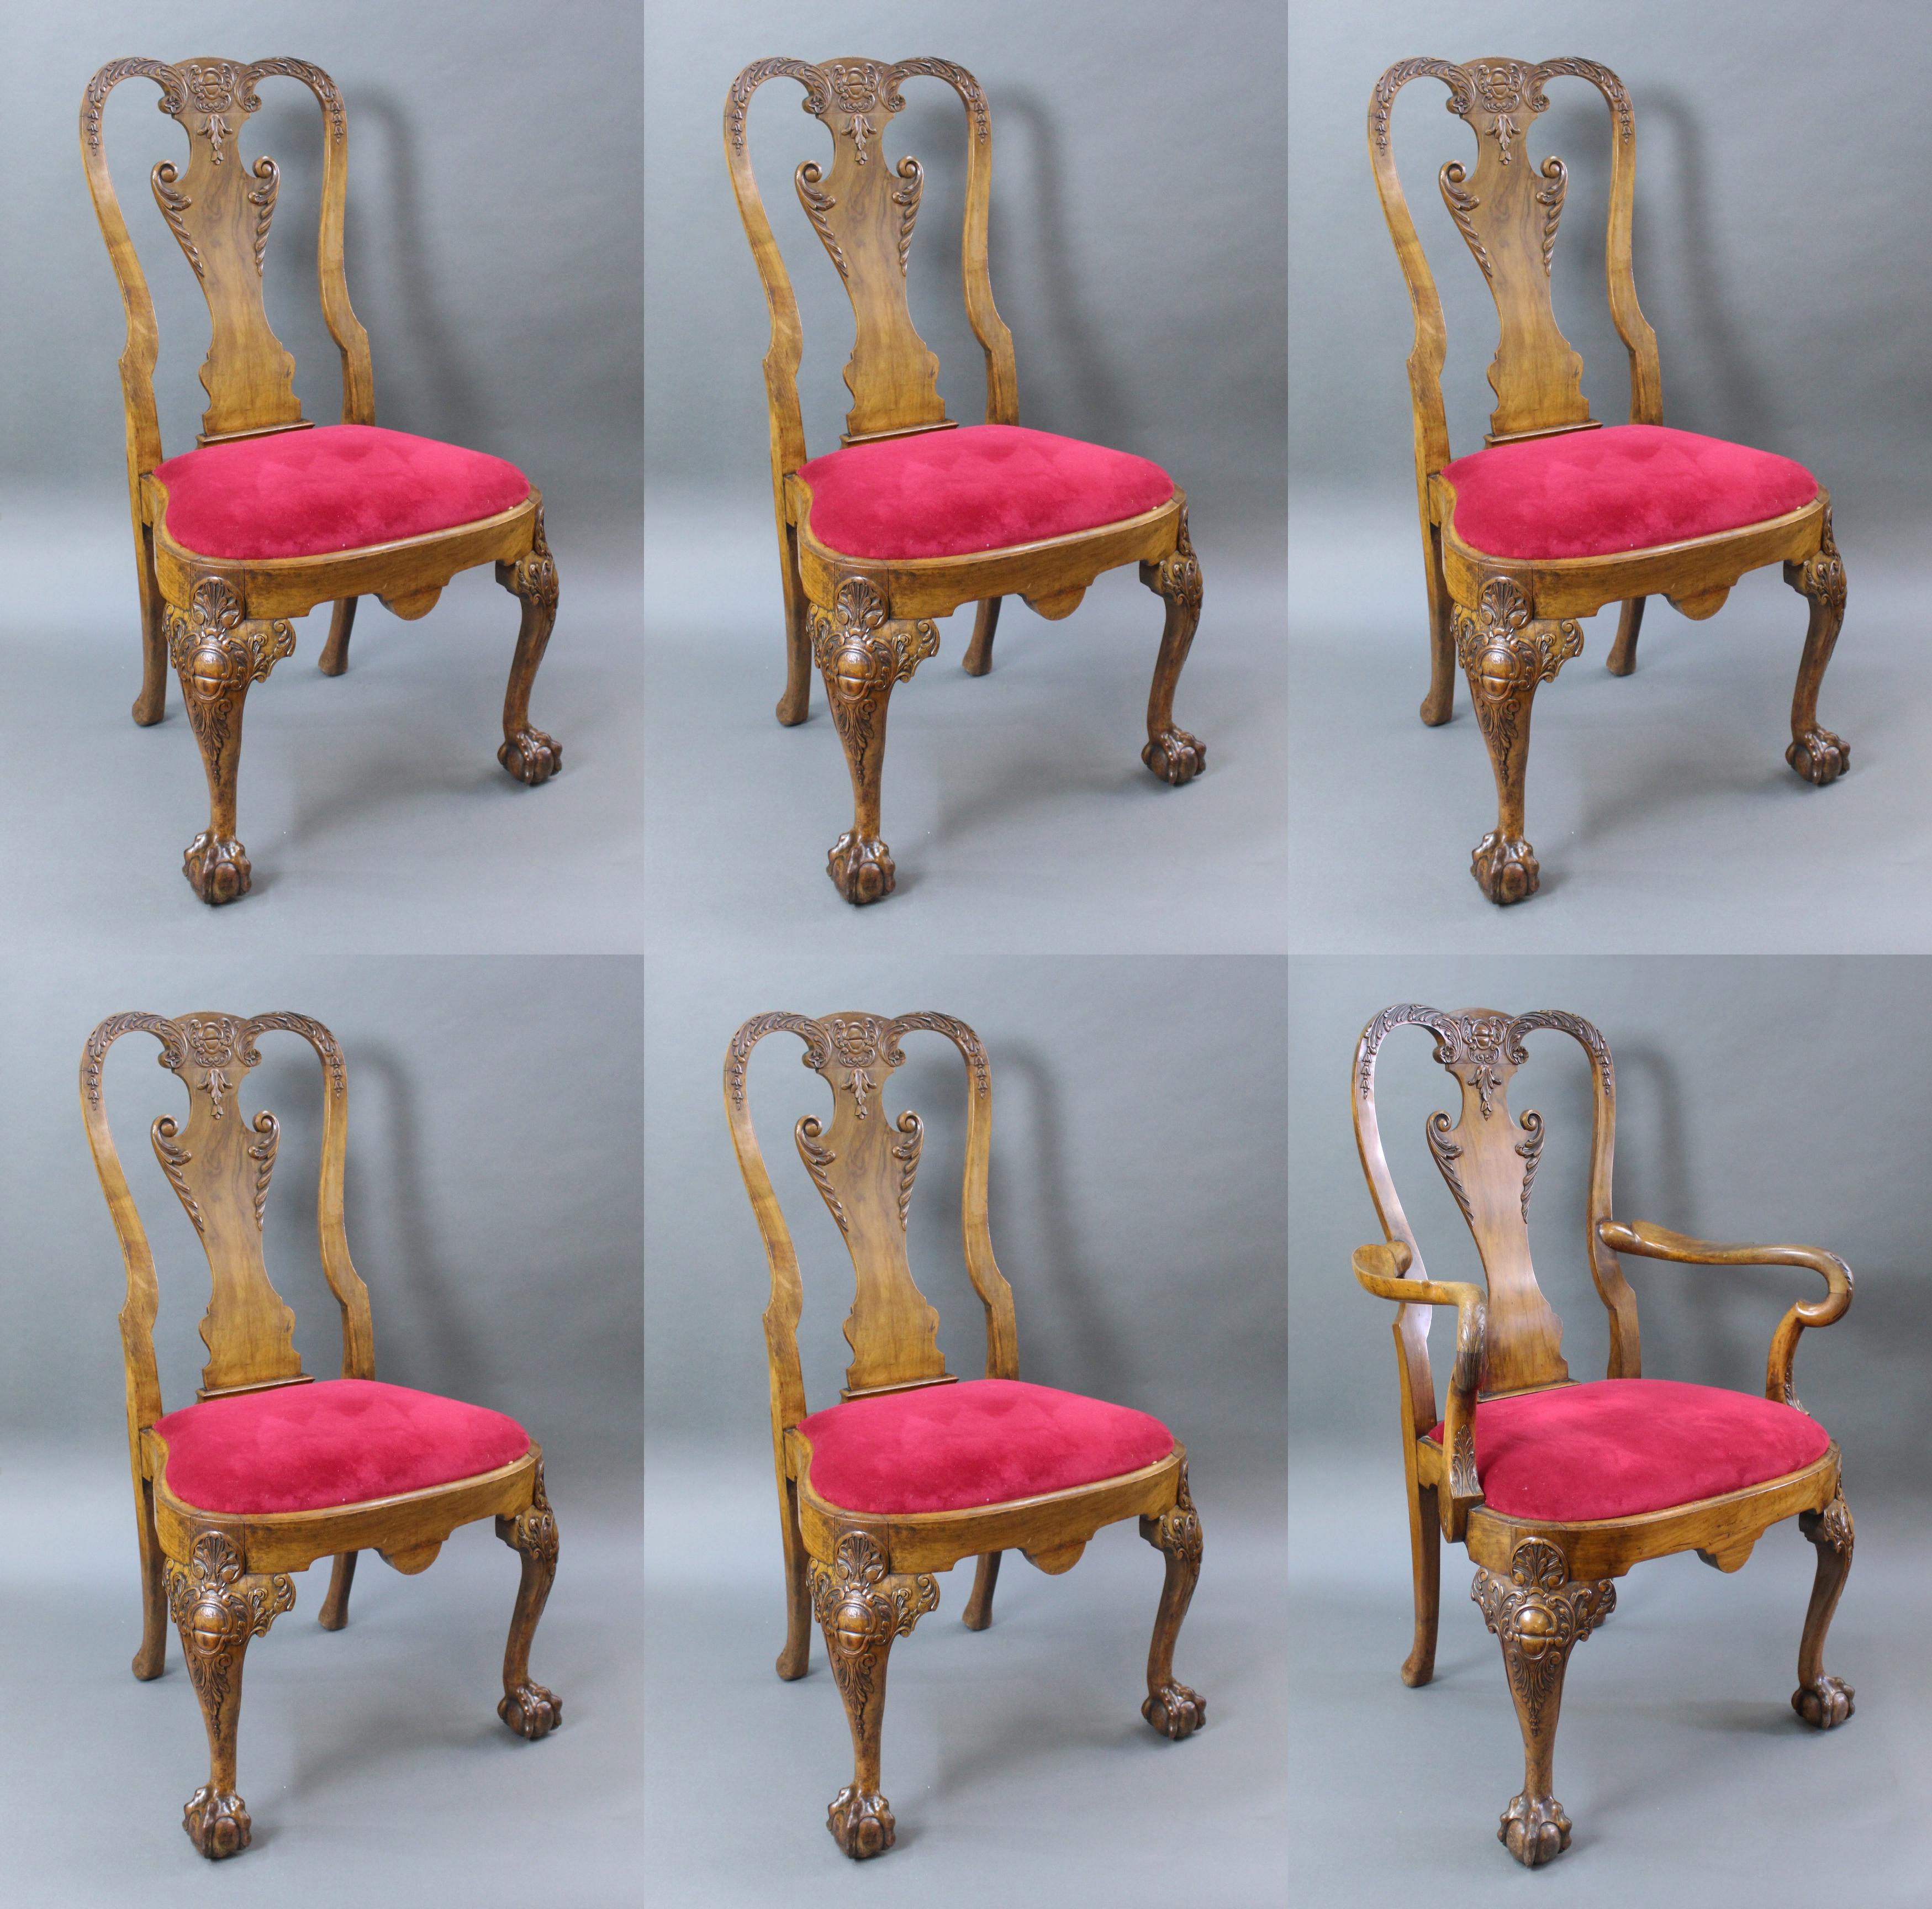 Set of 6 early 20th c. Georgian style carved walnut dining chairs


Chair
Width 58 cm / 23 in
Depth 46 cm / 18 in
Height 103 cm / 40 1/2 in
Height ( to seat) 49 cm / 19 1/4 in
 
Carver
Width
67 cm cm / 26 1/2 in
Depth
51 cm / 20